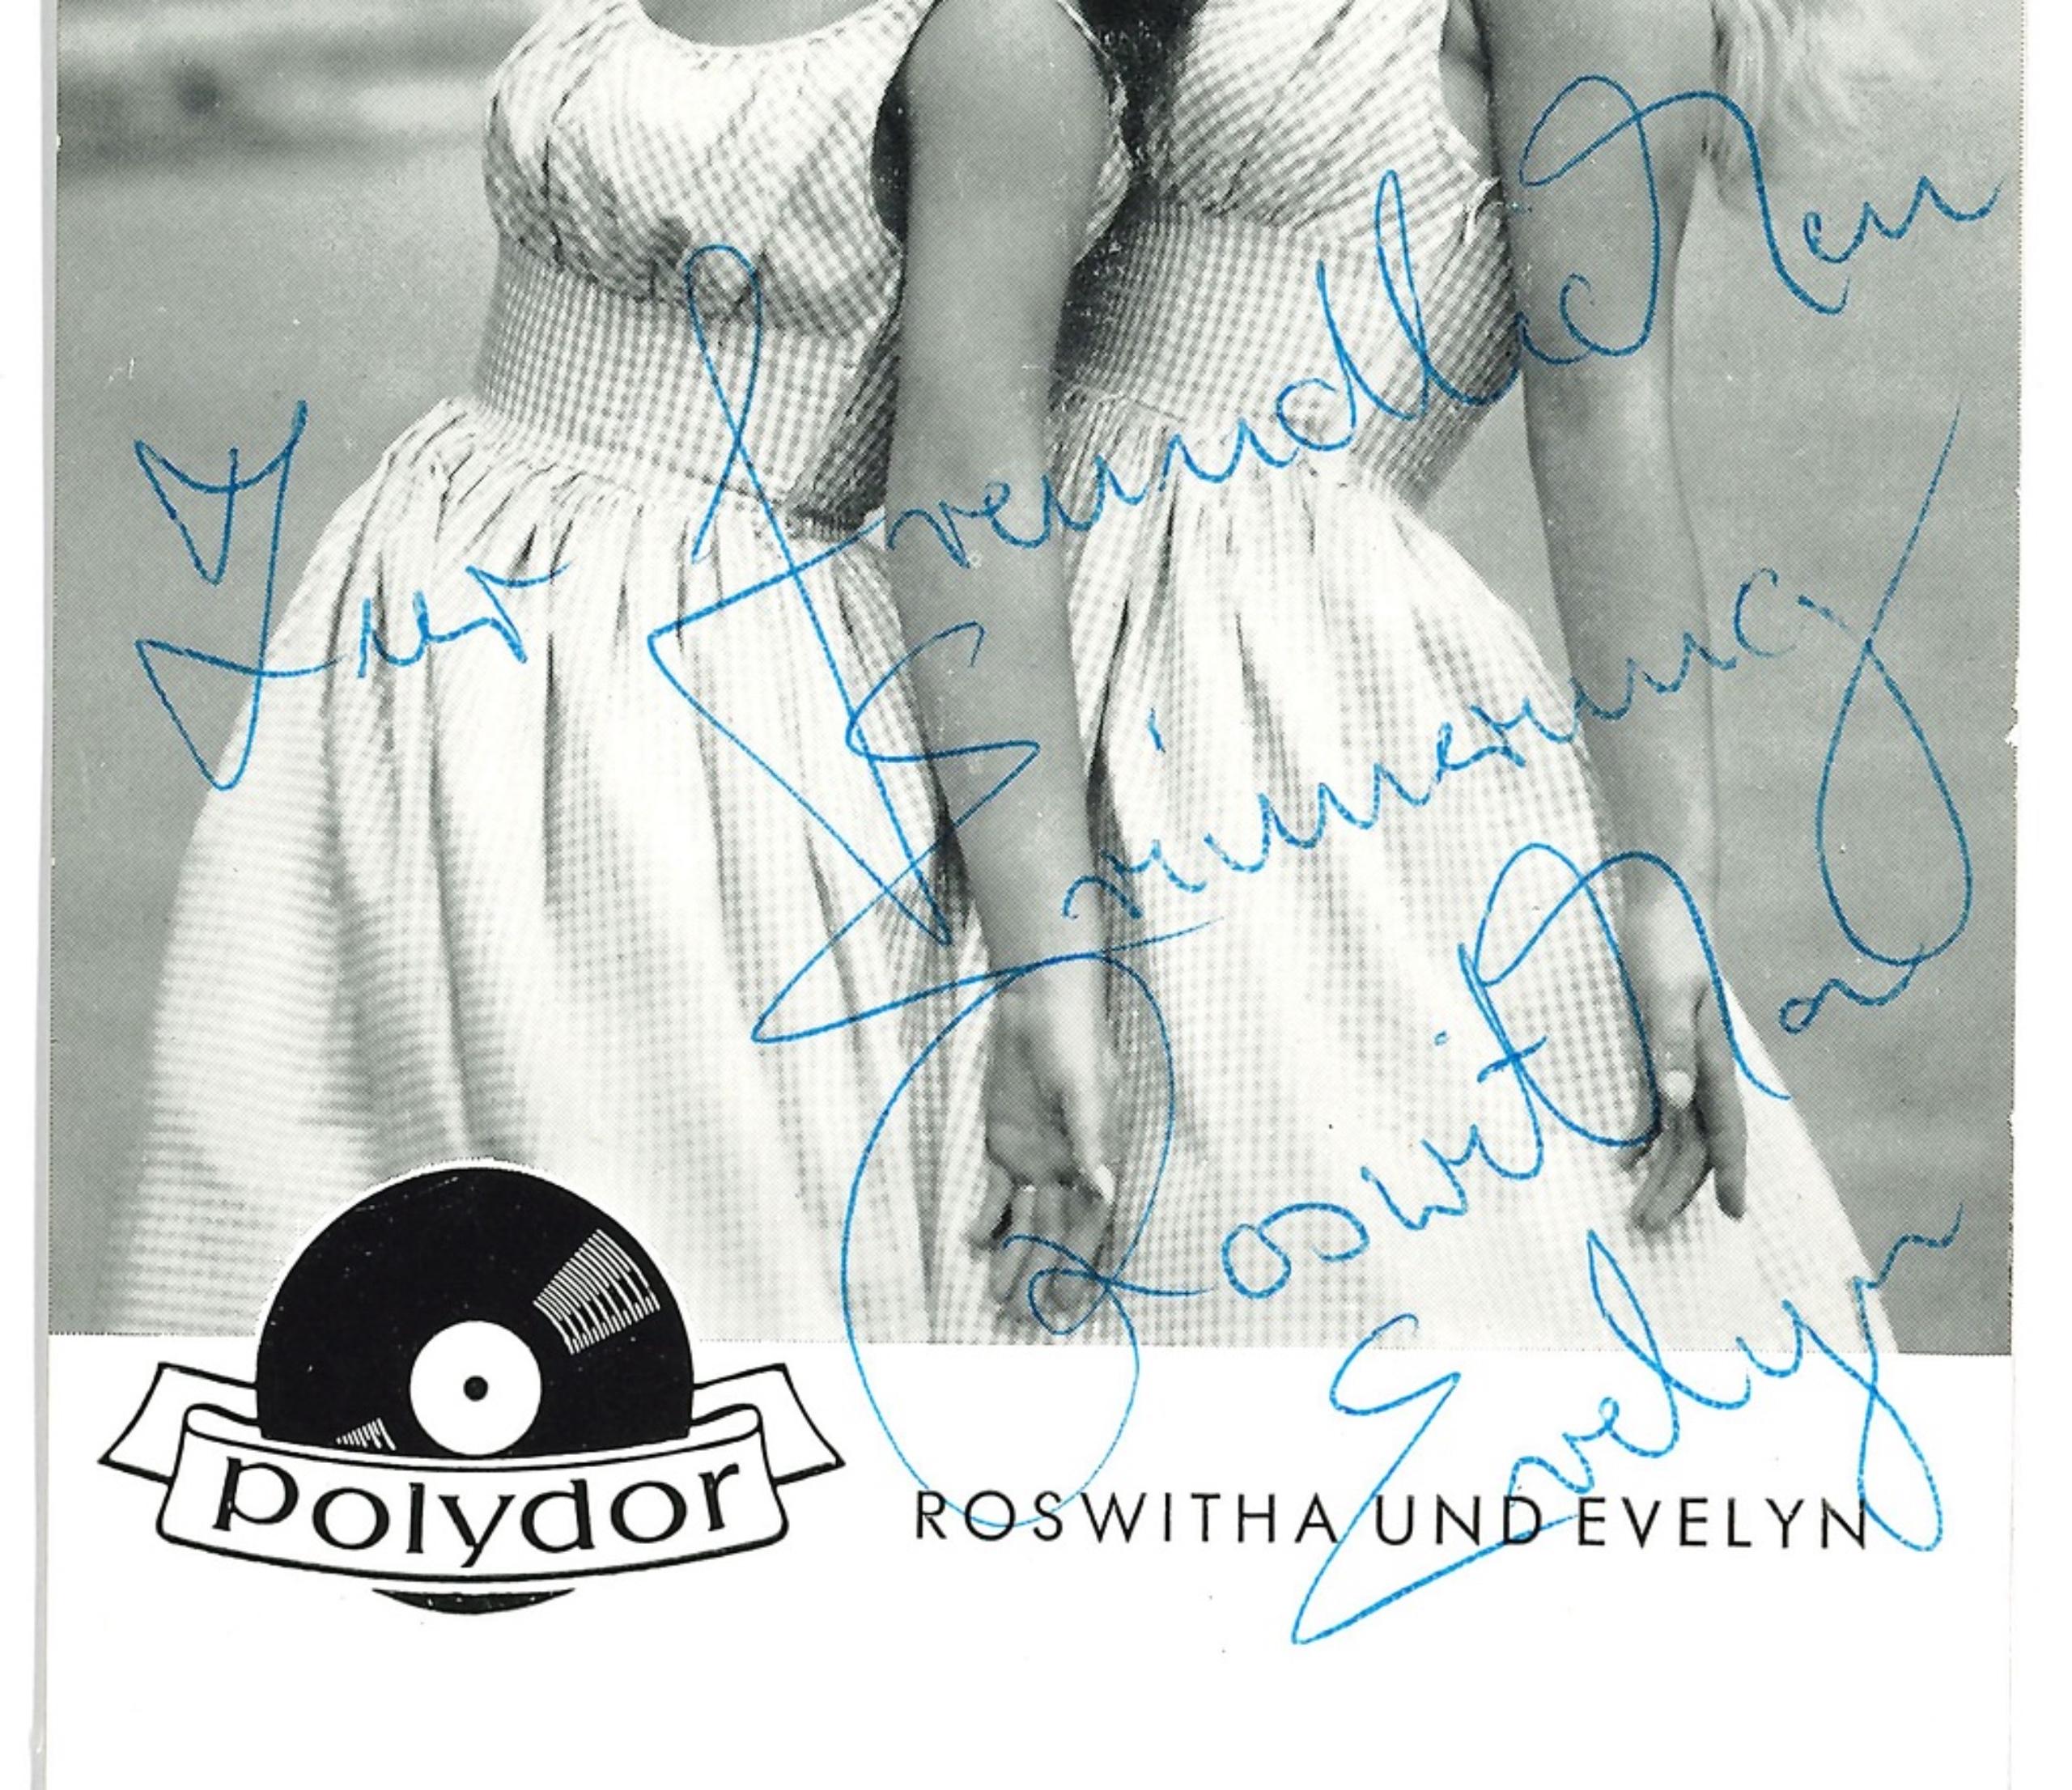 Roswitha and Evelyn - Original Autographed b/w Postcard - 1950s - Photograph by Unknown